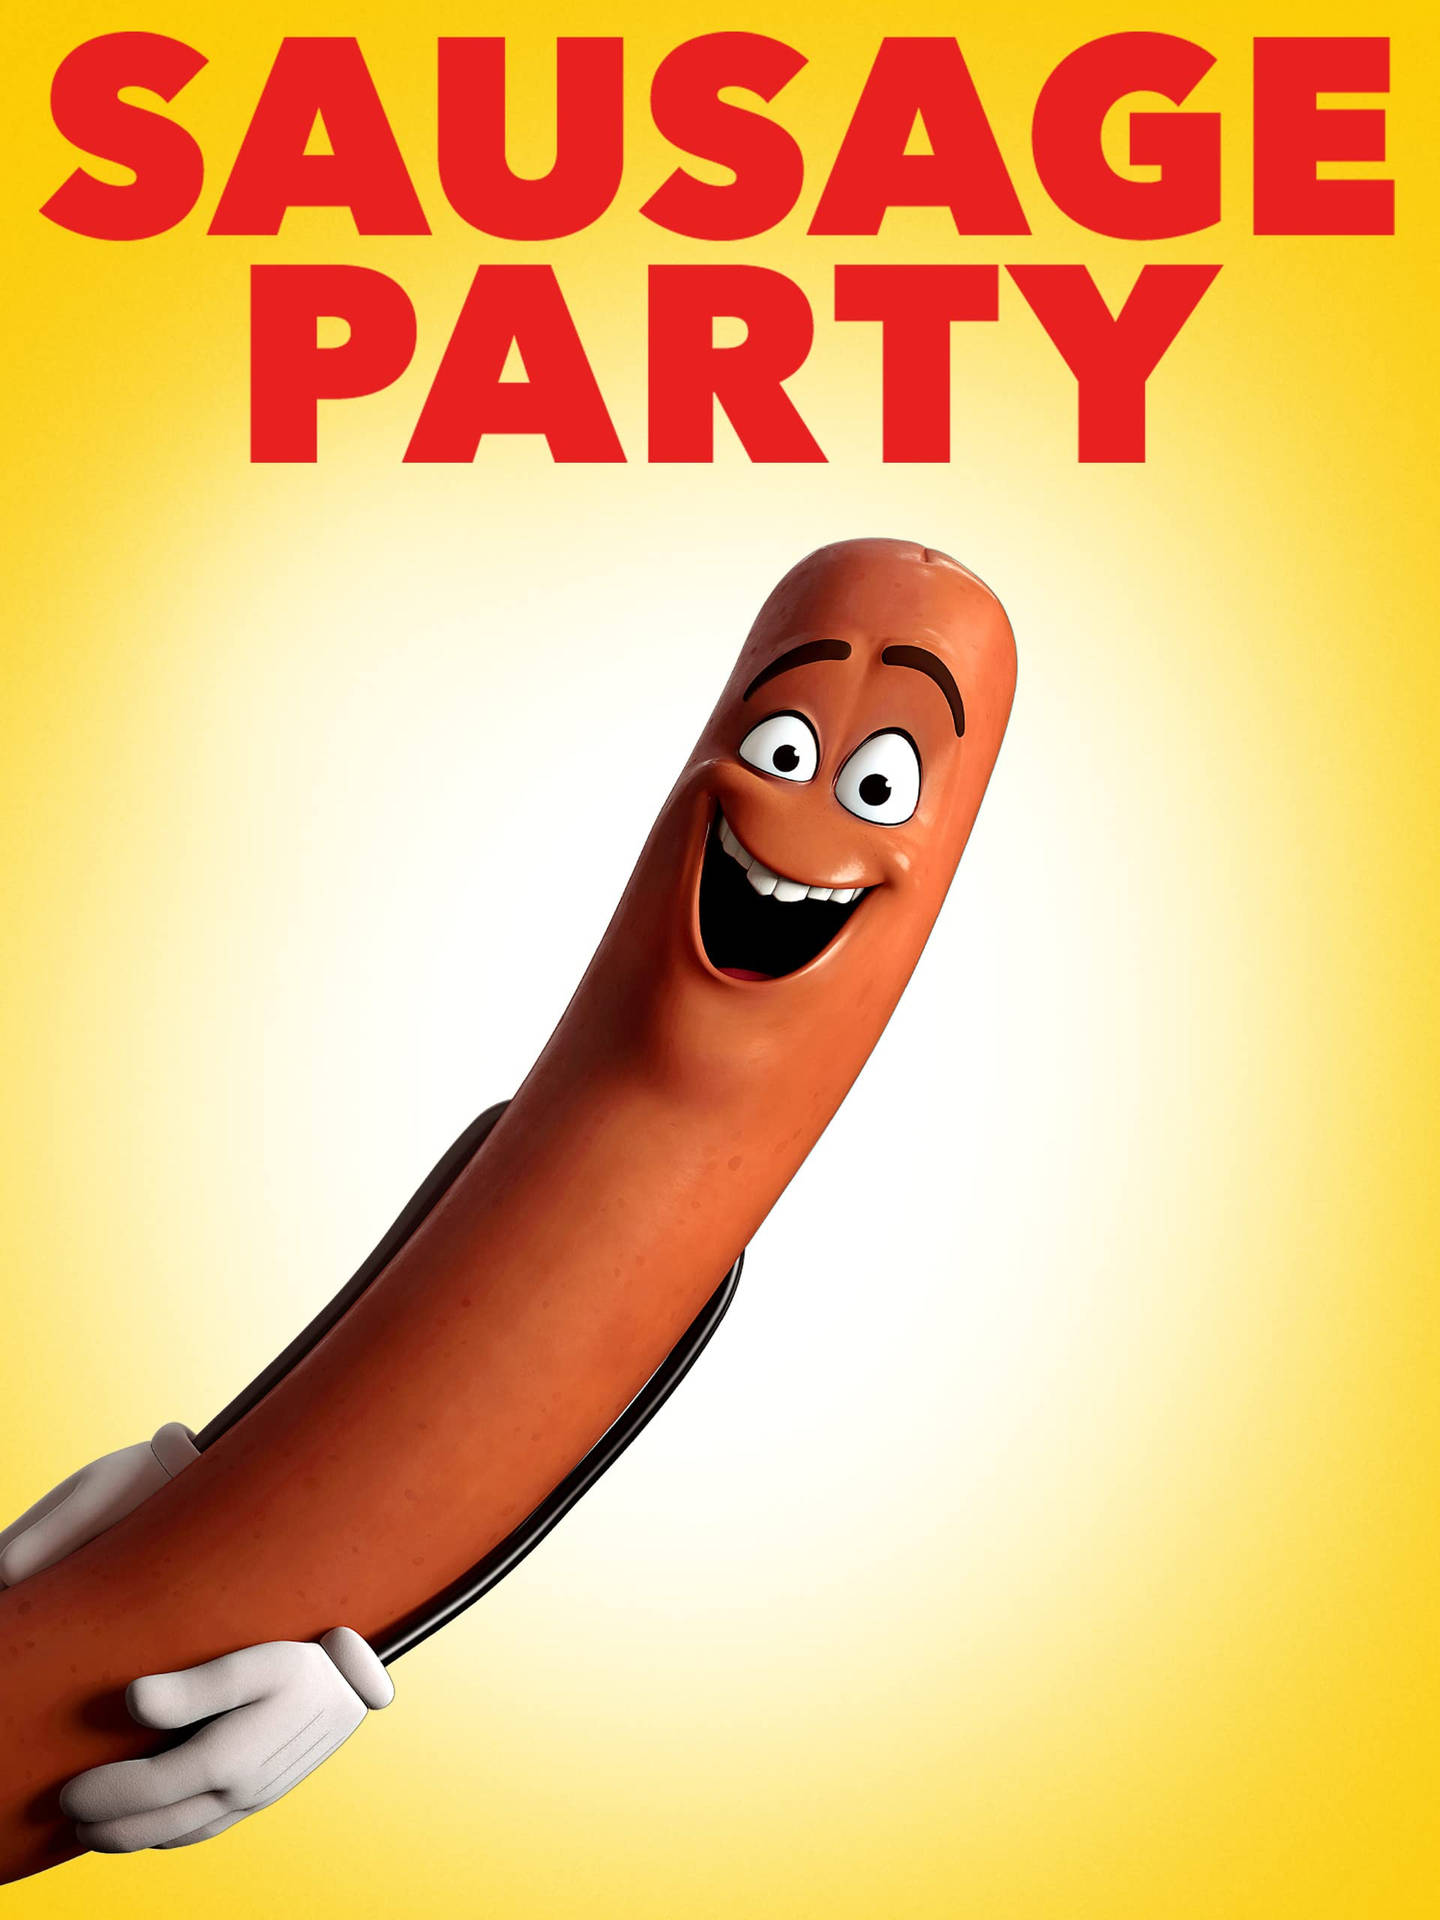 Smiling Frank Sausage Party Poster Background